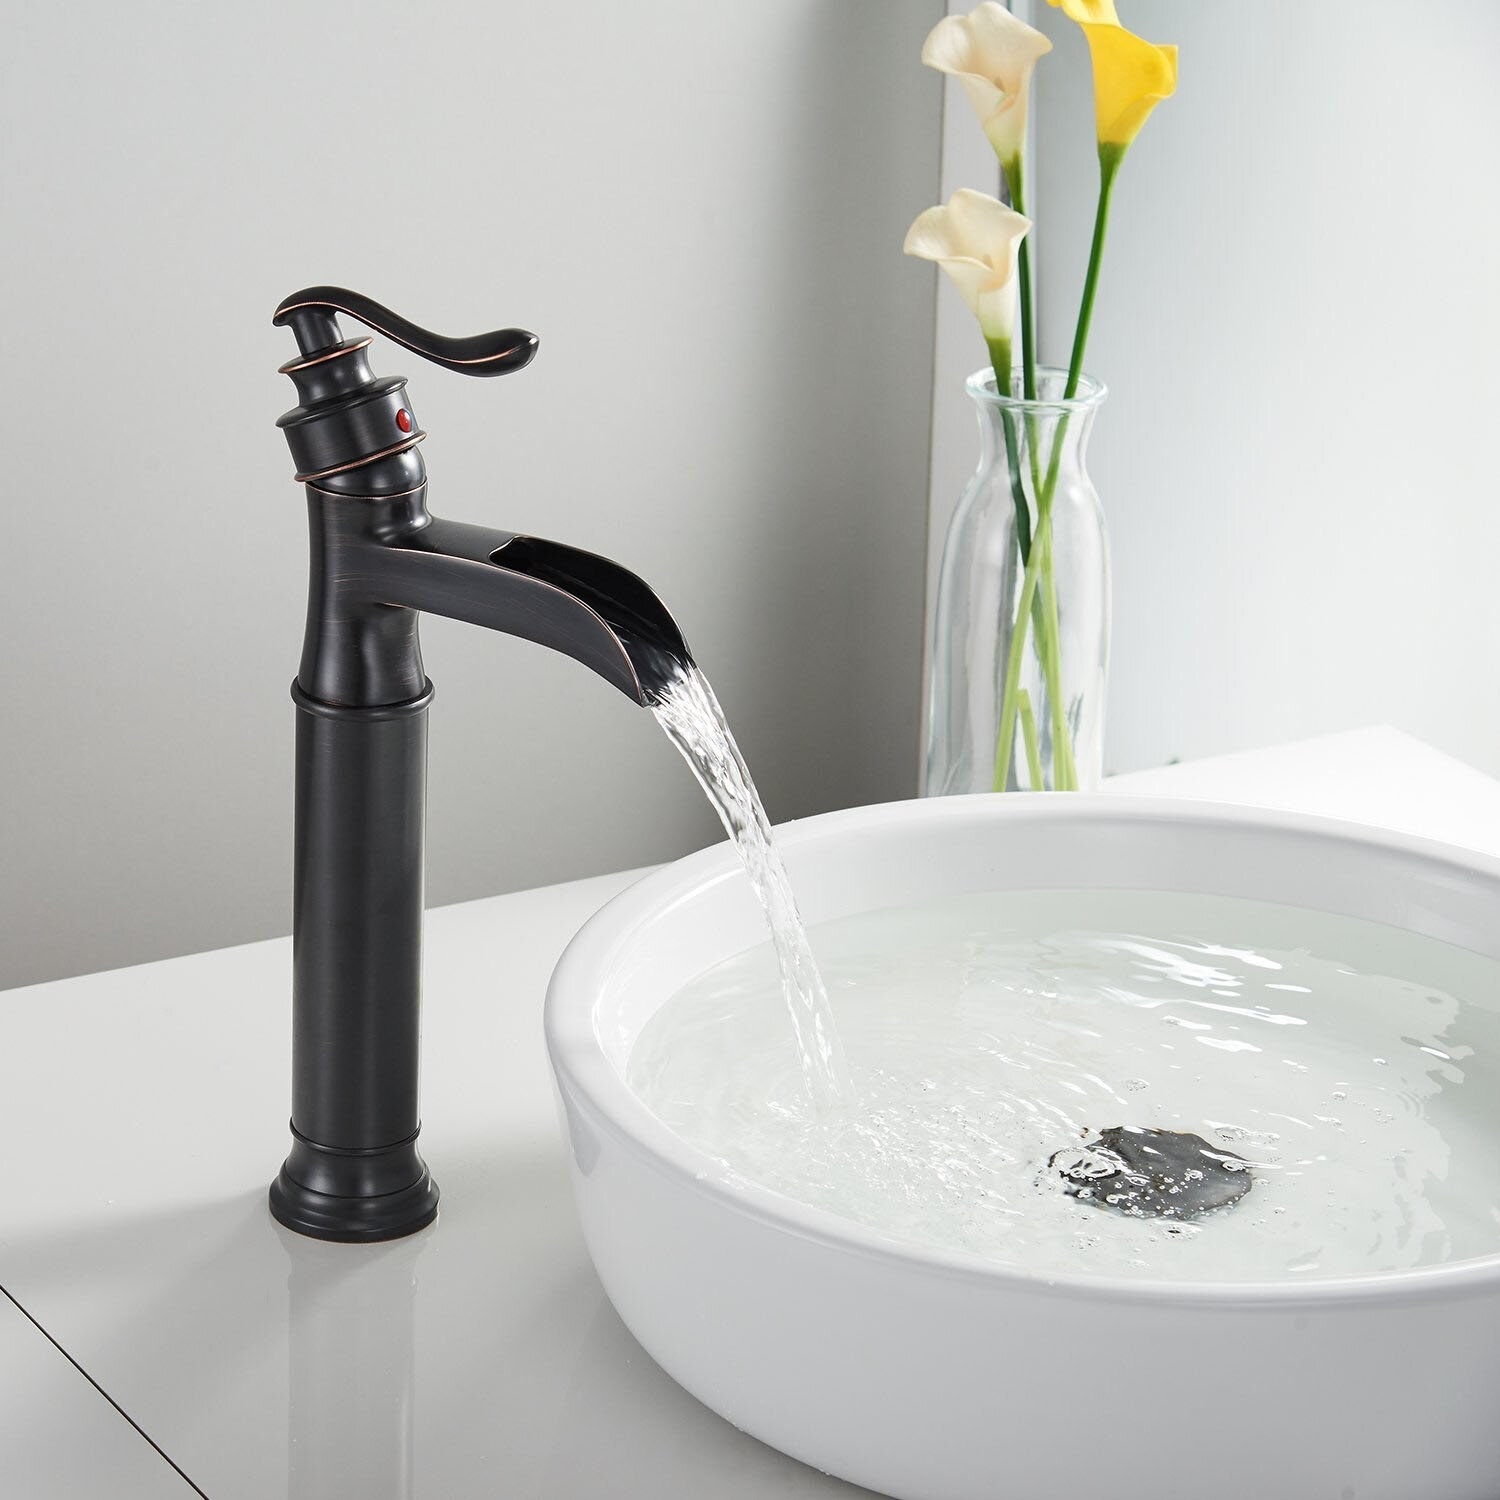 The faucet in the color Oil Rubbed Bronze